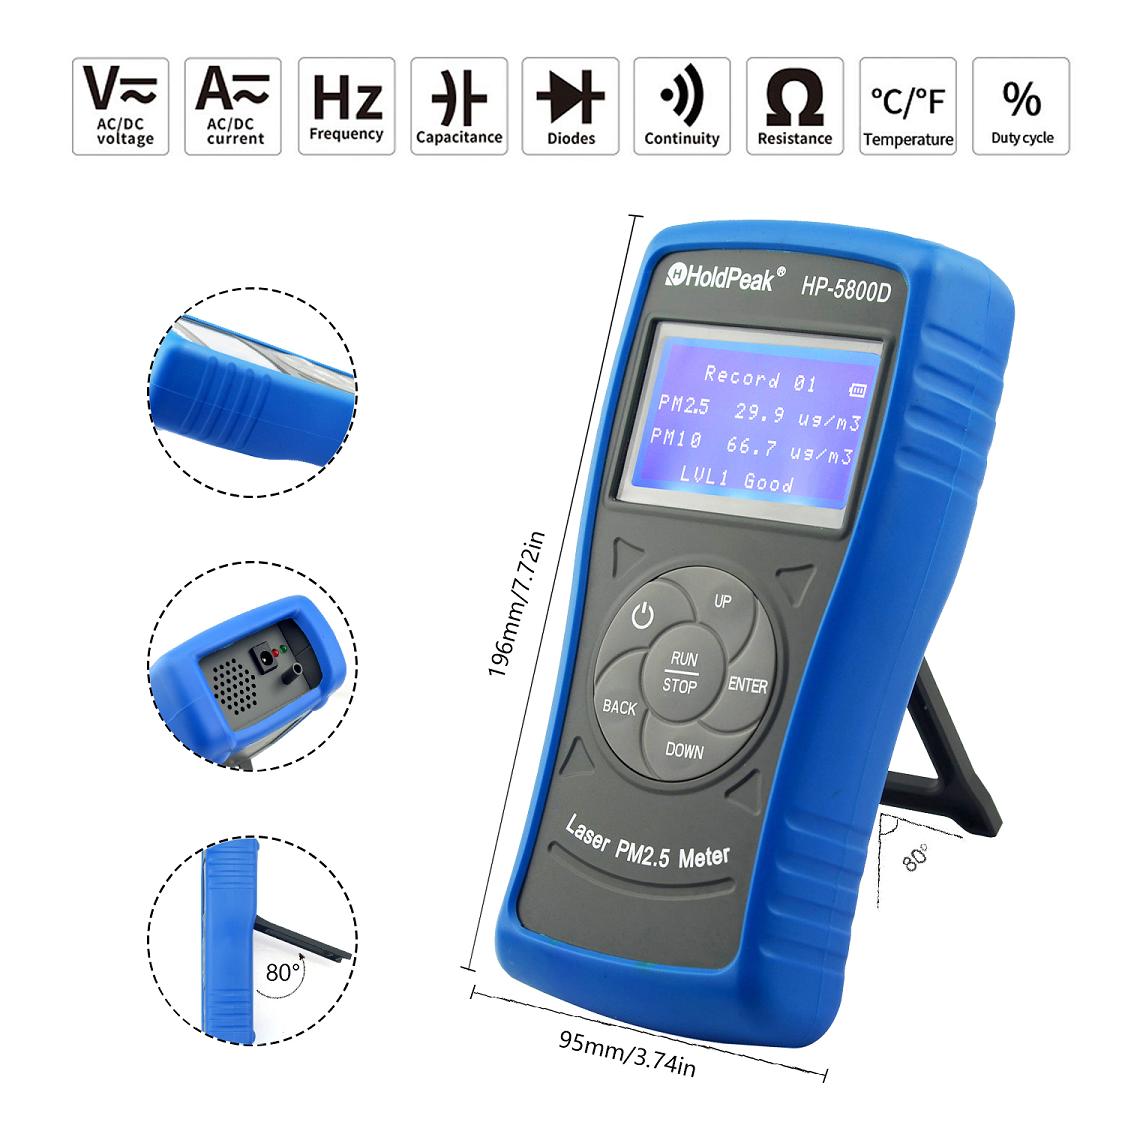 HoldPeak portable pollution detector project for business for office